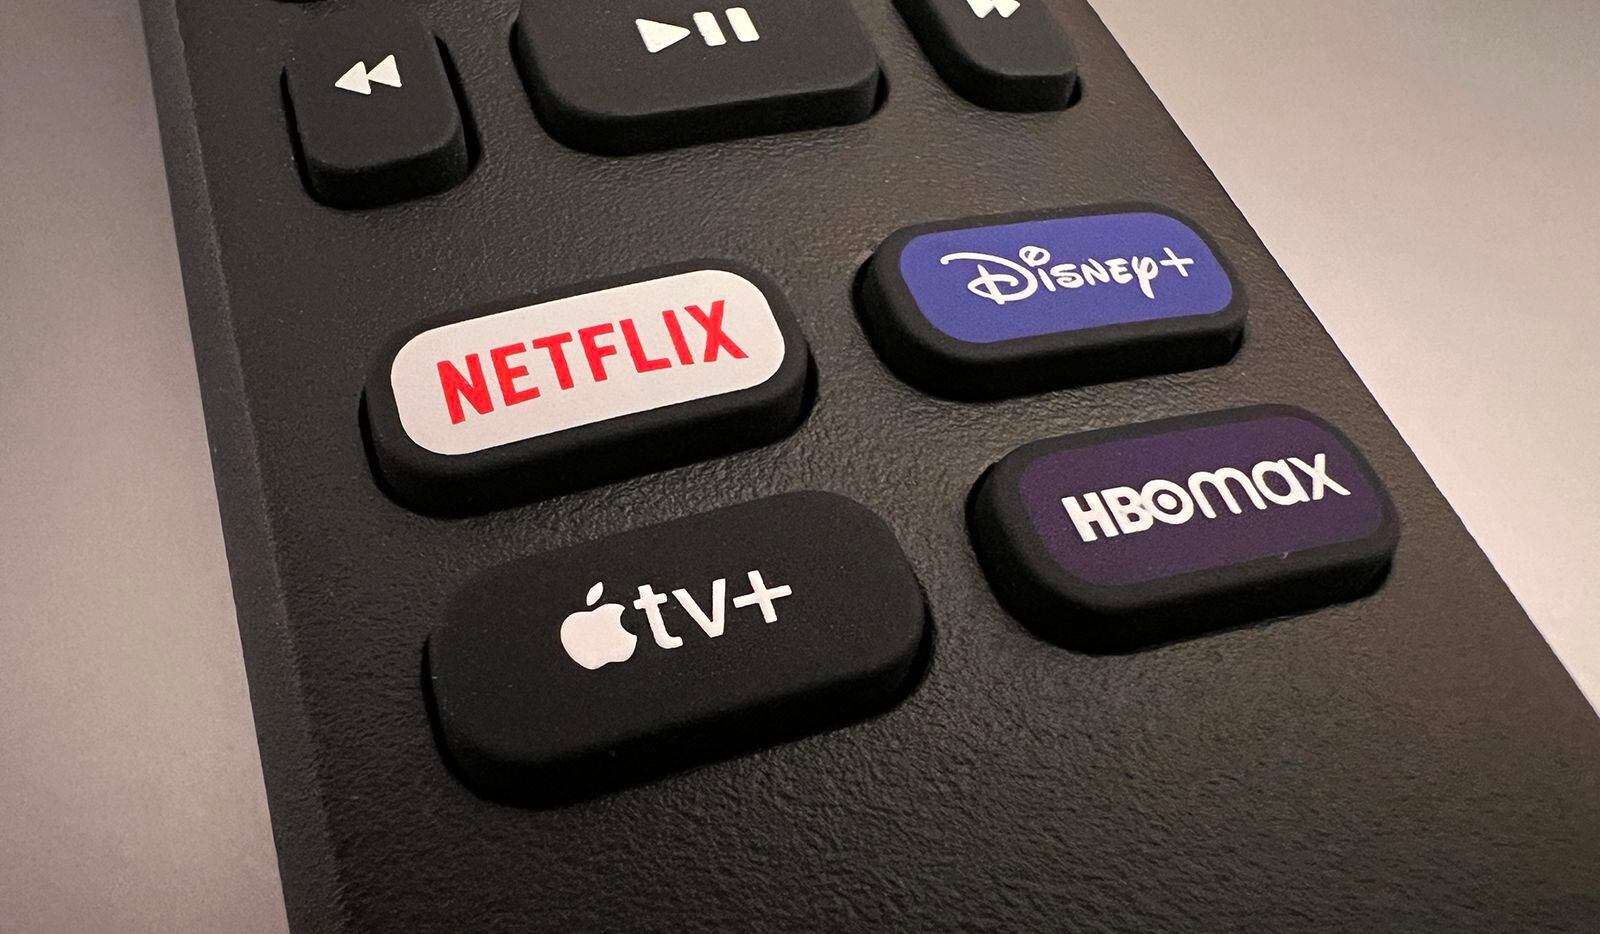 In order to watch streaming content, you need to have either a smart TV or a streaming box...